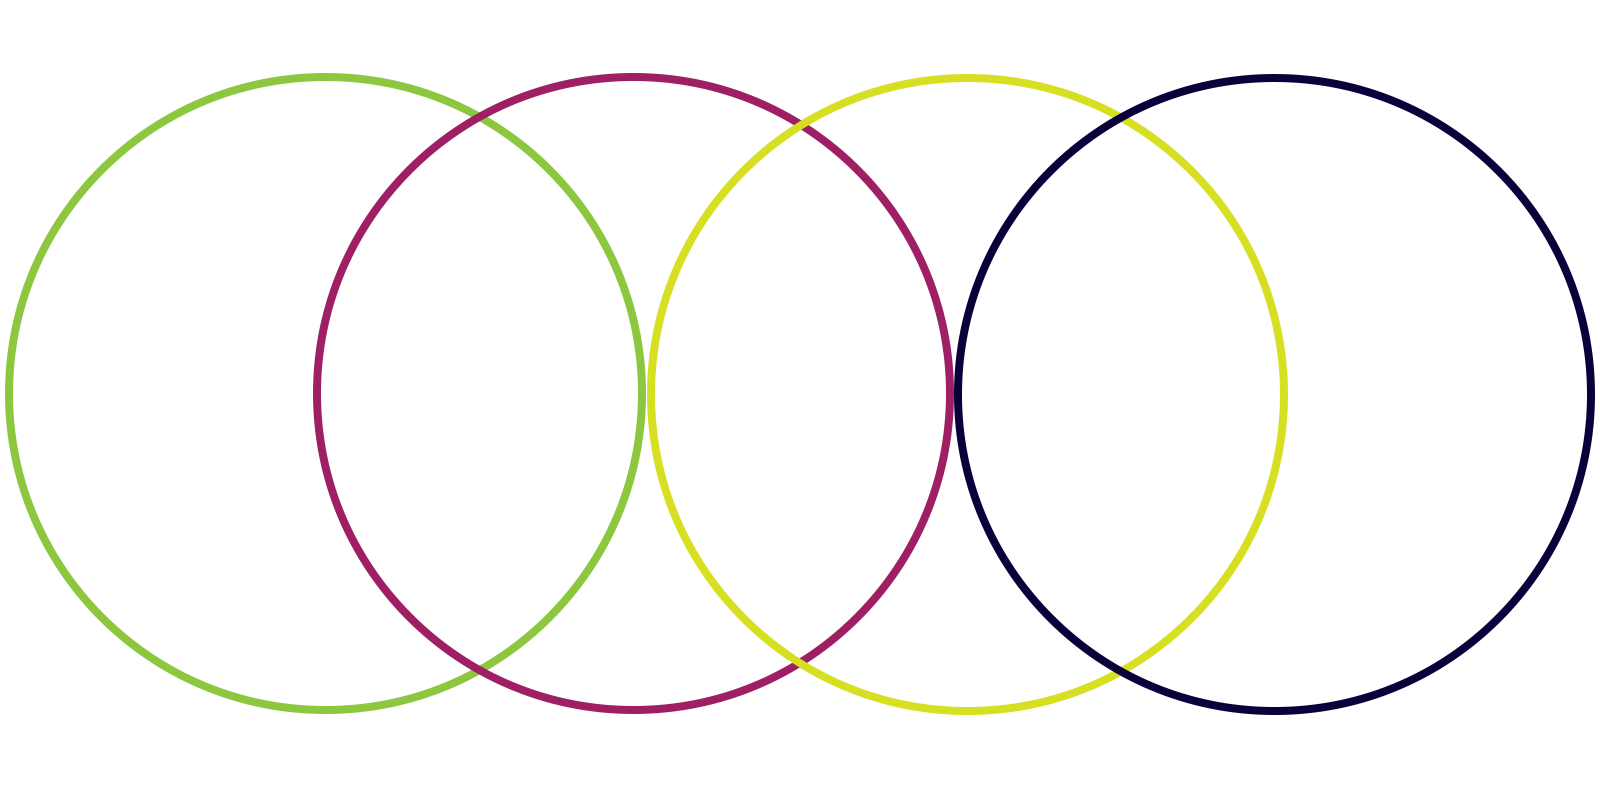 Green, pink, yellow, and blue rings overlapping in a line.